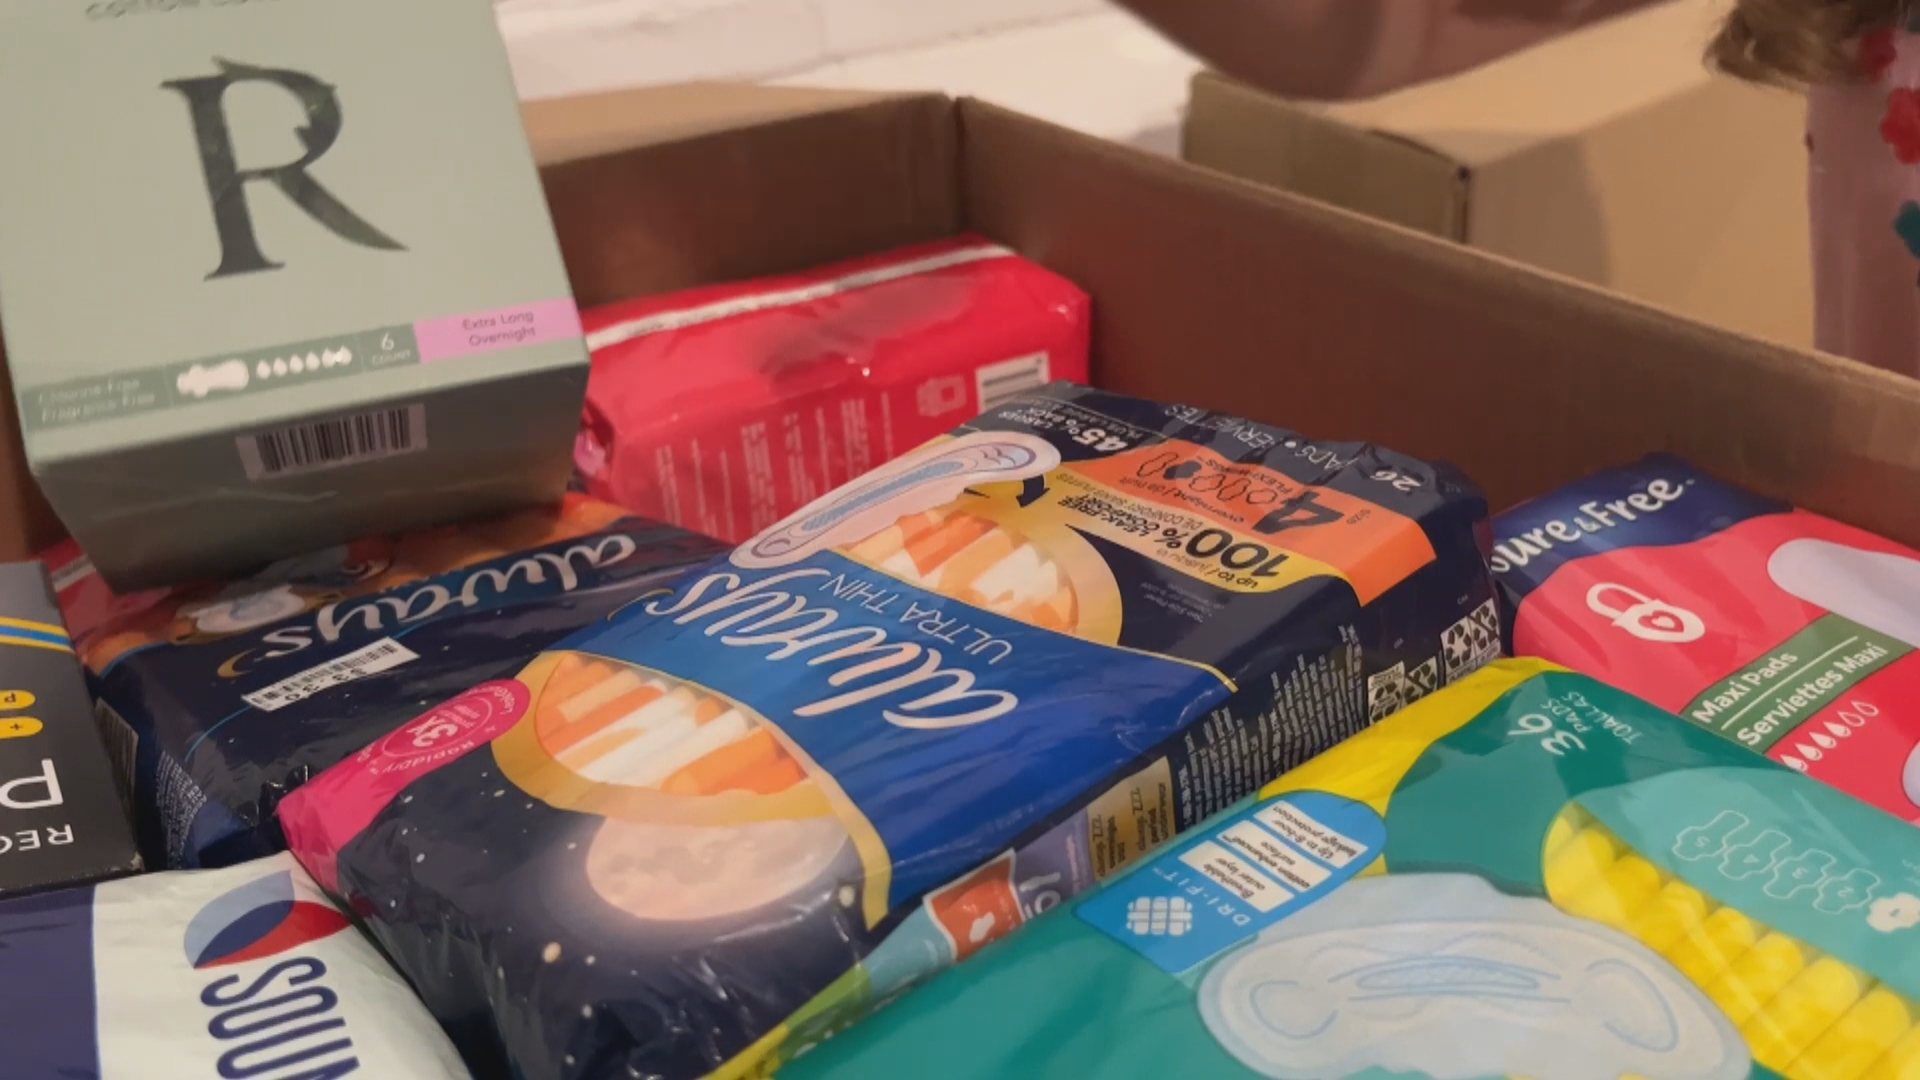 Tax on menstrual supplies adds to shortage pressure